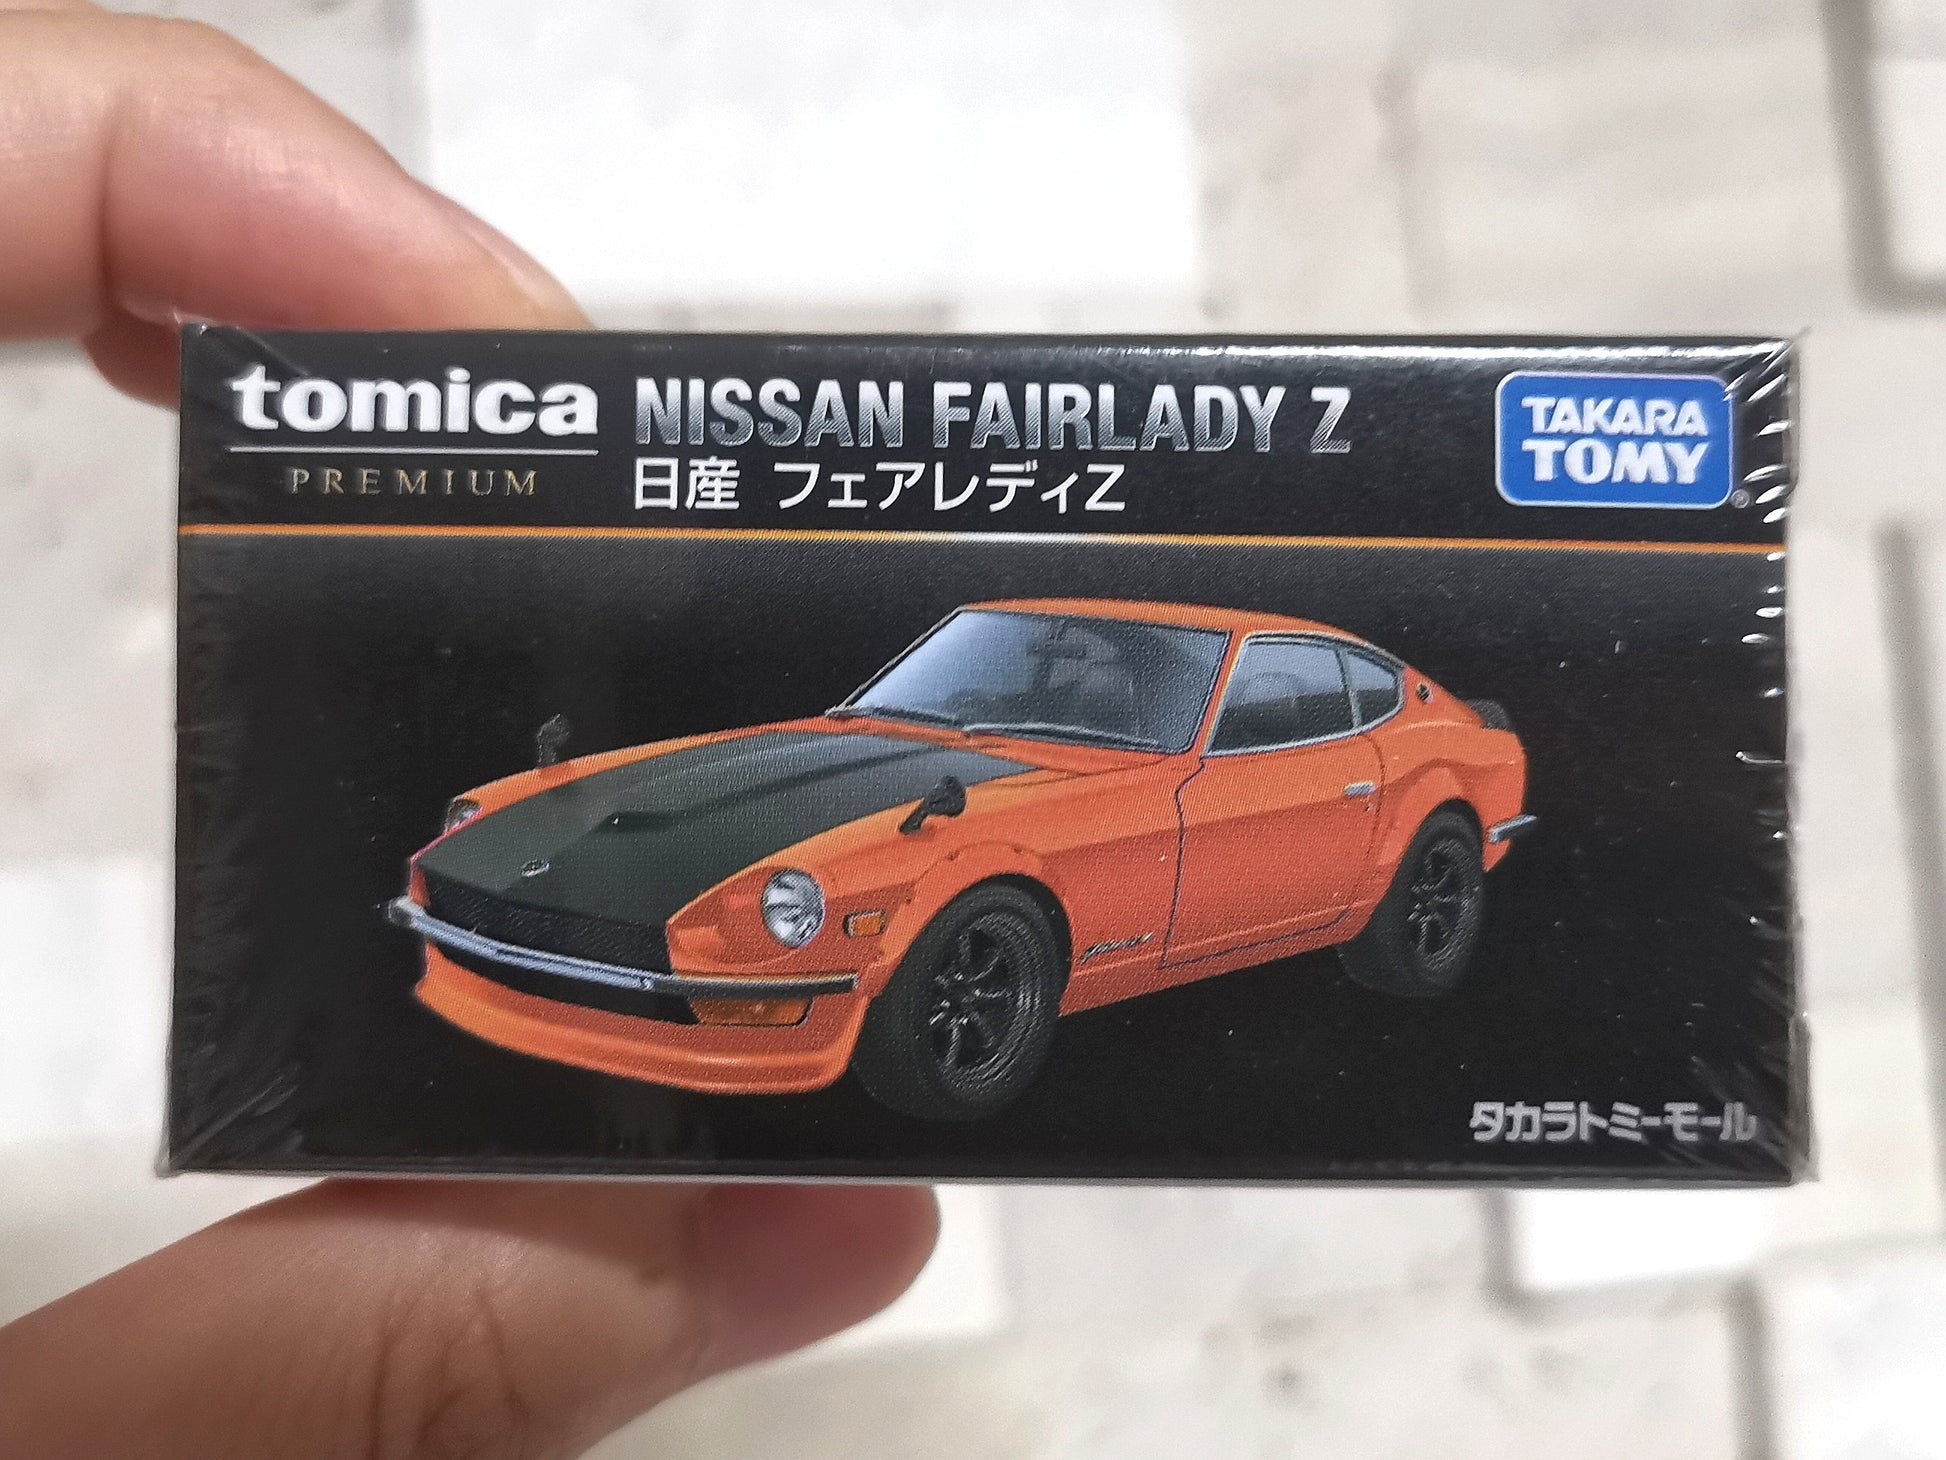 TOMICA PREMIUM Online Shop Exclusive Nissan Fairlady Z 1:58 SCALE NEW IN Box Takara Tomy